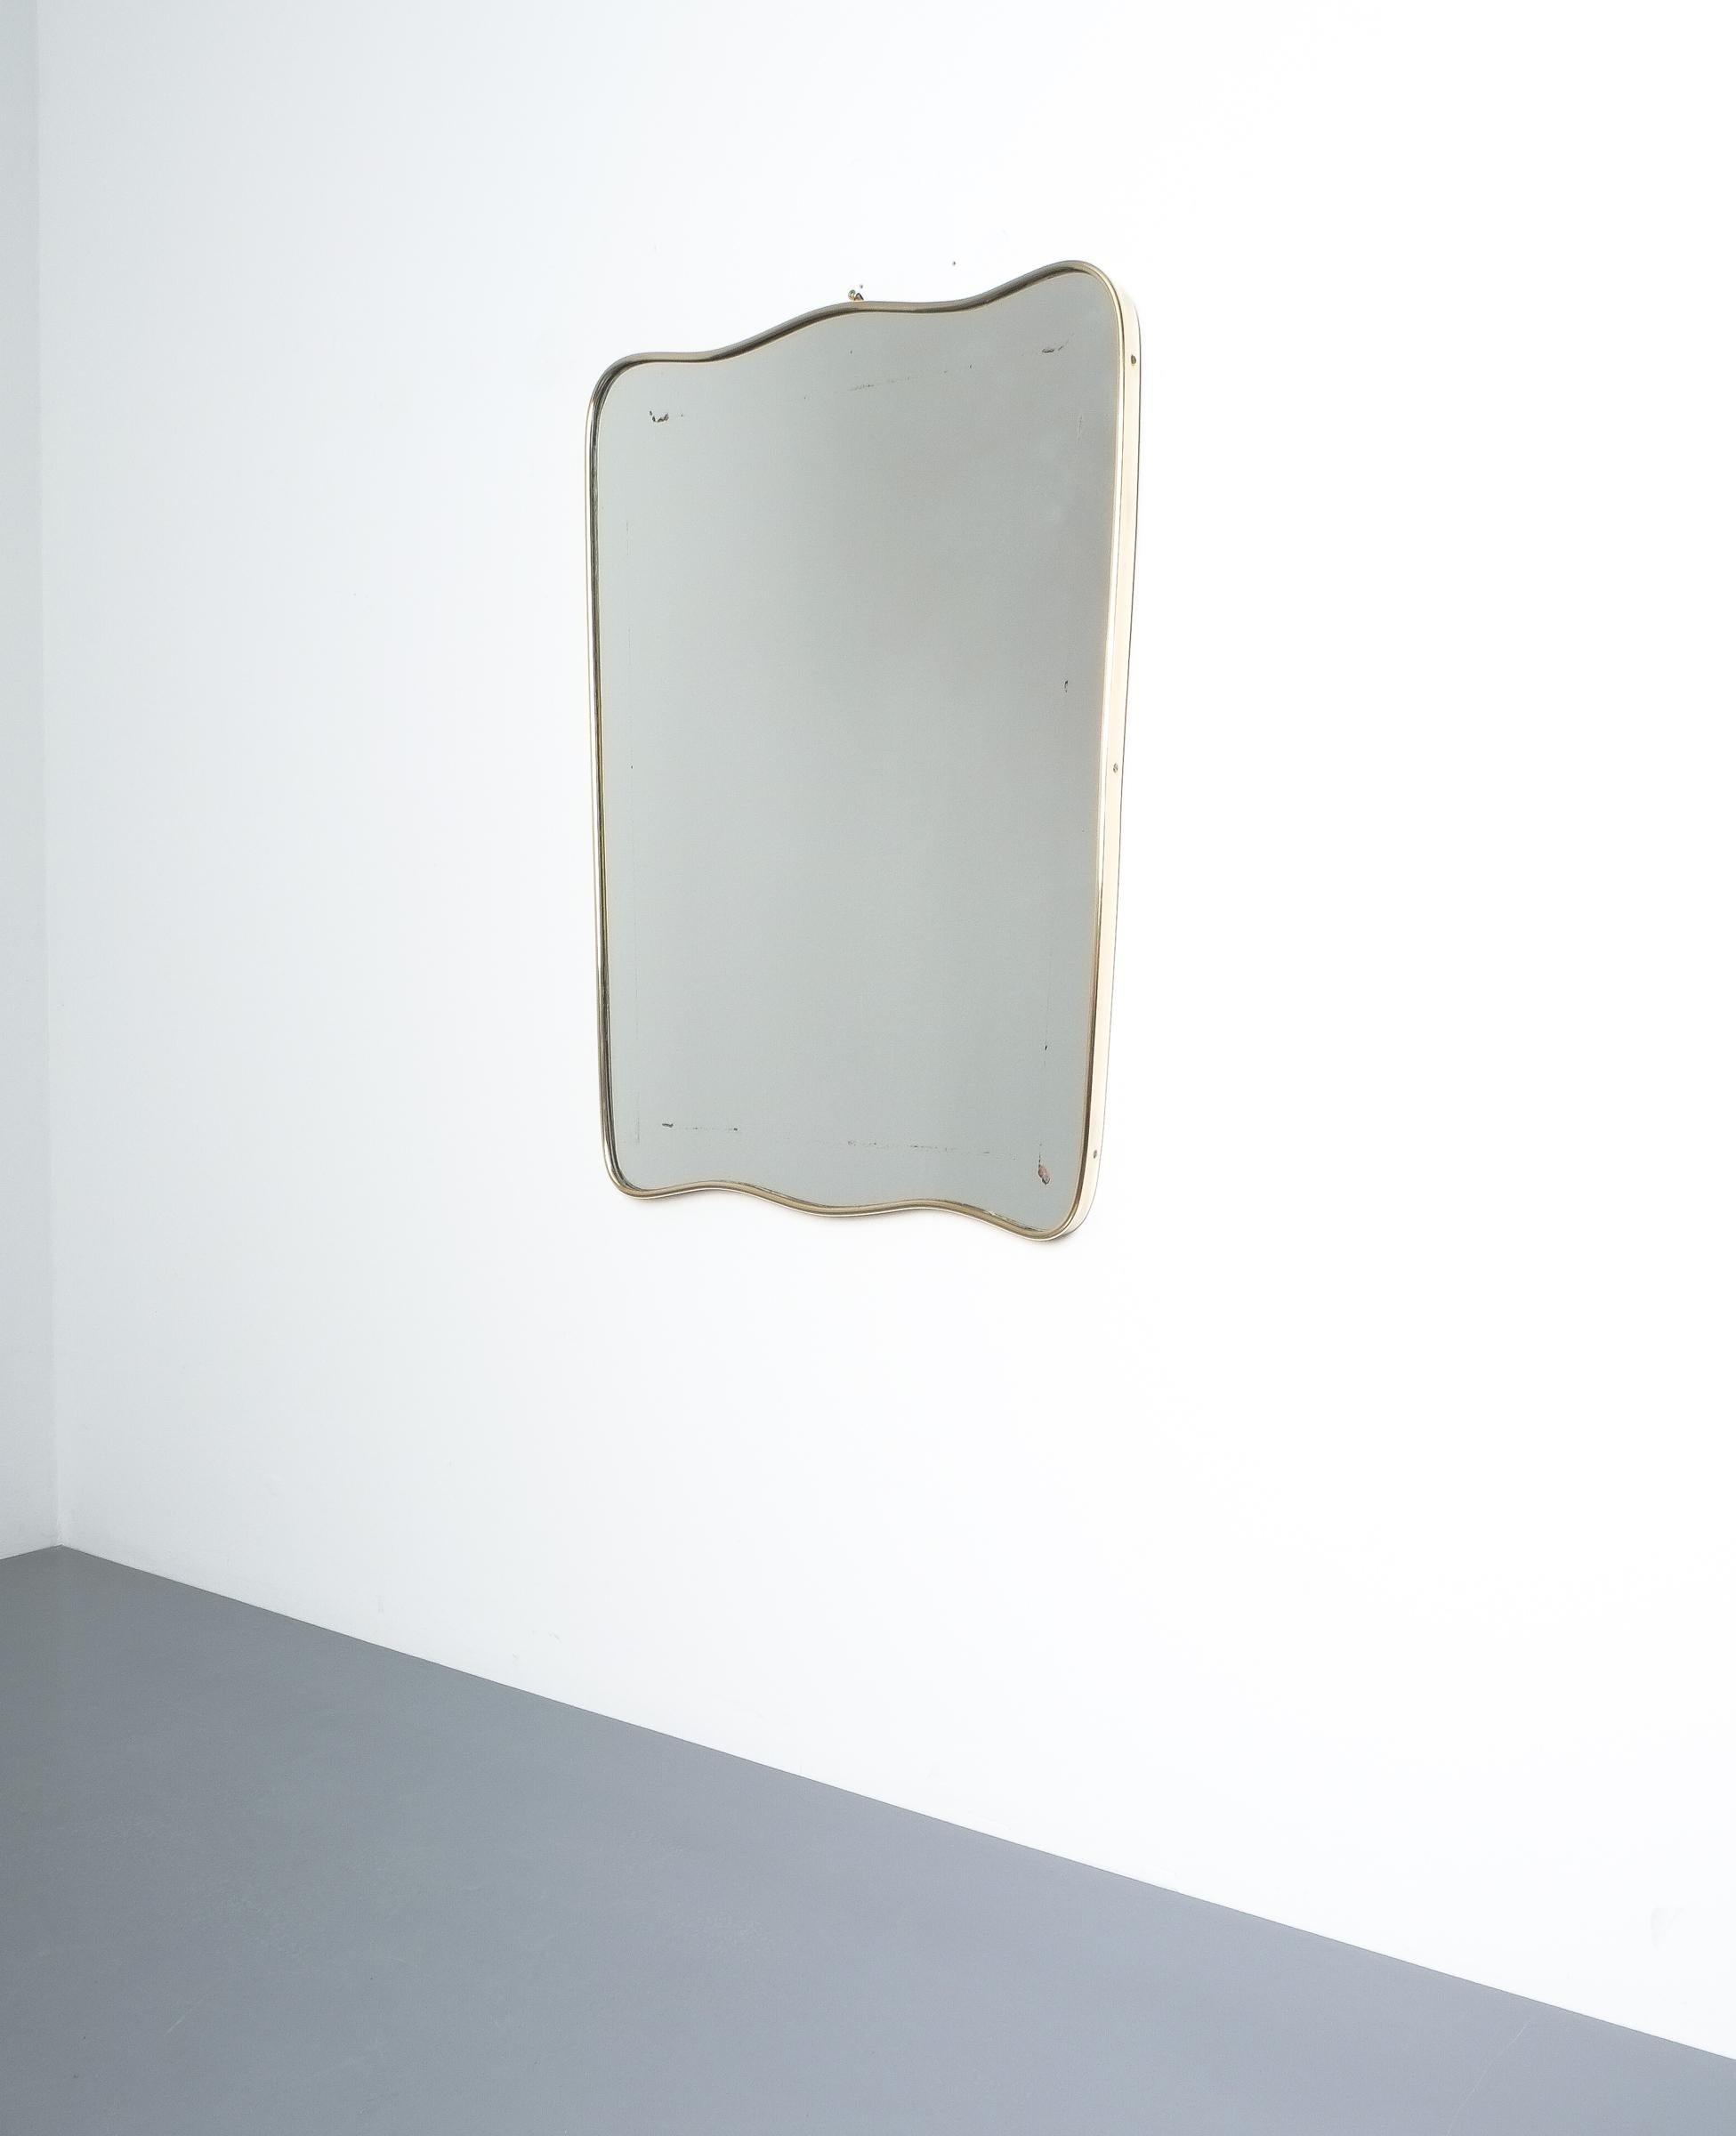 Curved Italian wall mirror minimal brass frame, Italy, circa 1955. Elegant and large wall mirror with a slender brass frame. Some staining on the mirror-glass (signs of aging) otherwise in good condition. Dimensions are 28.34